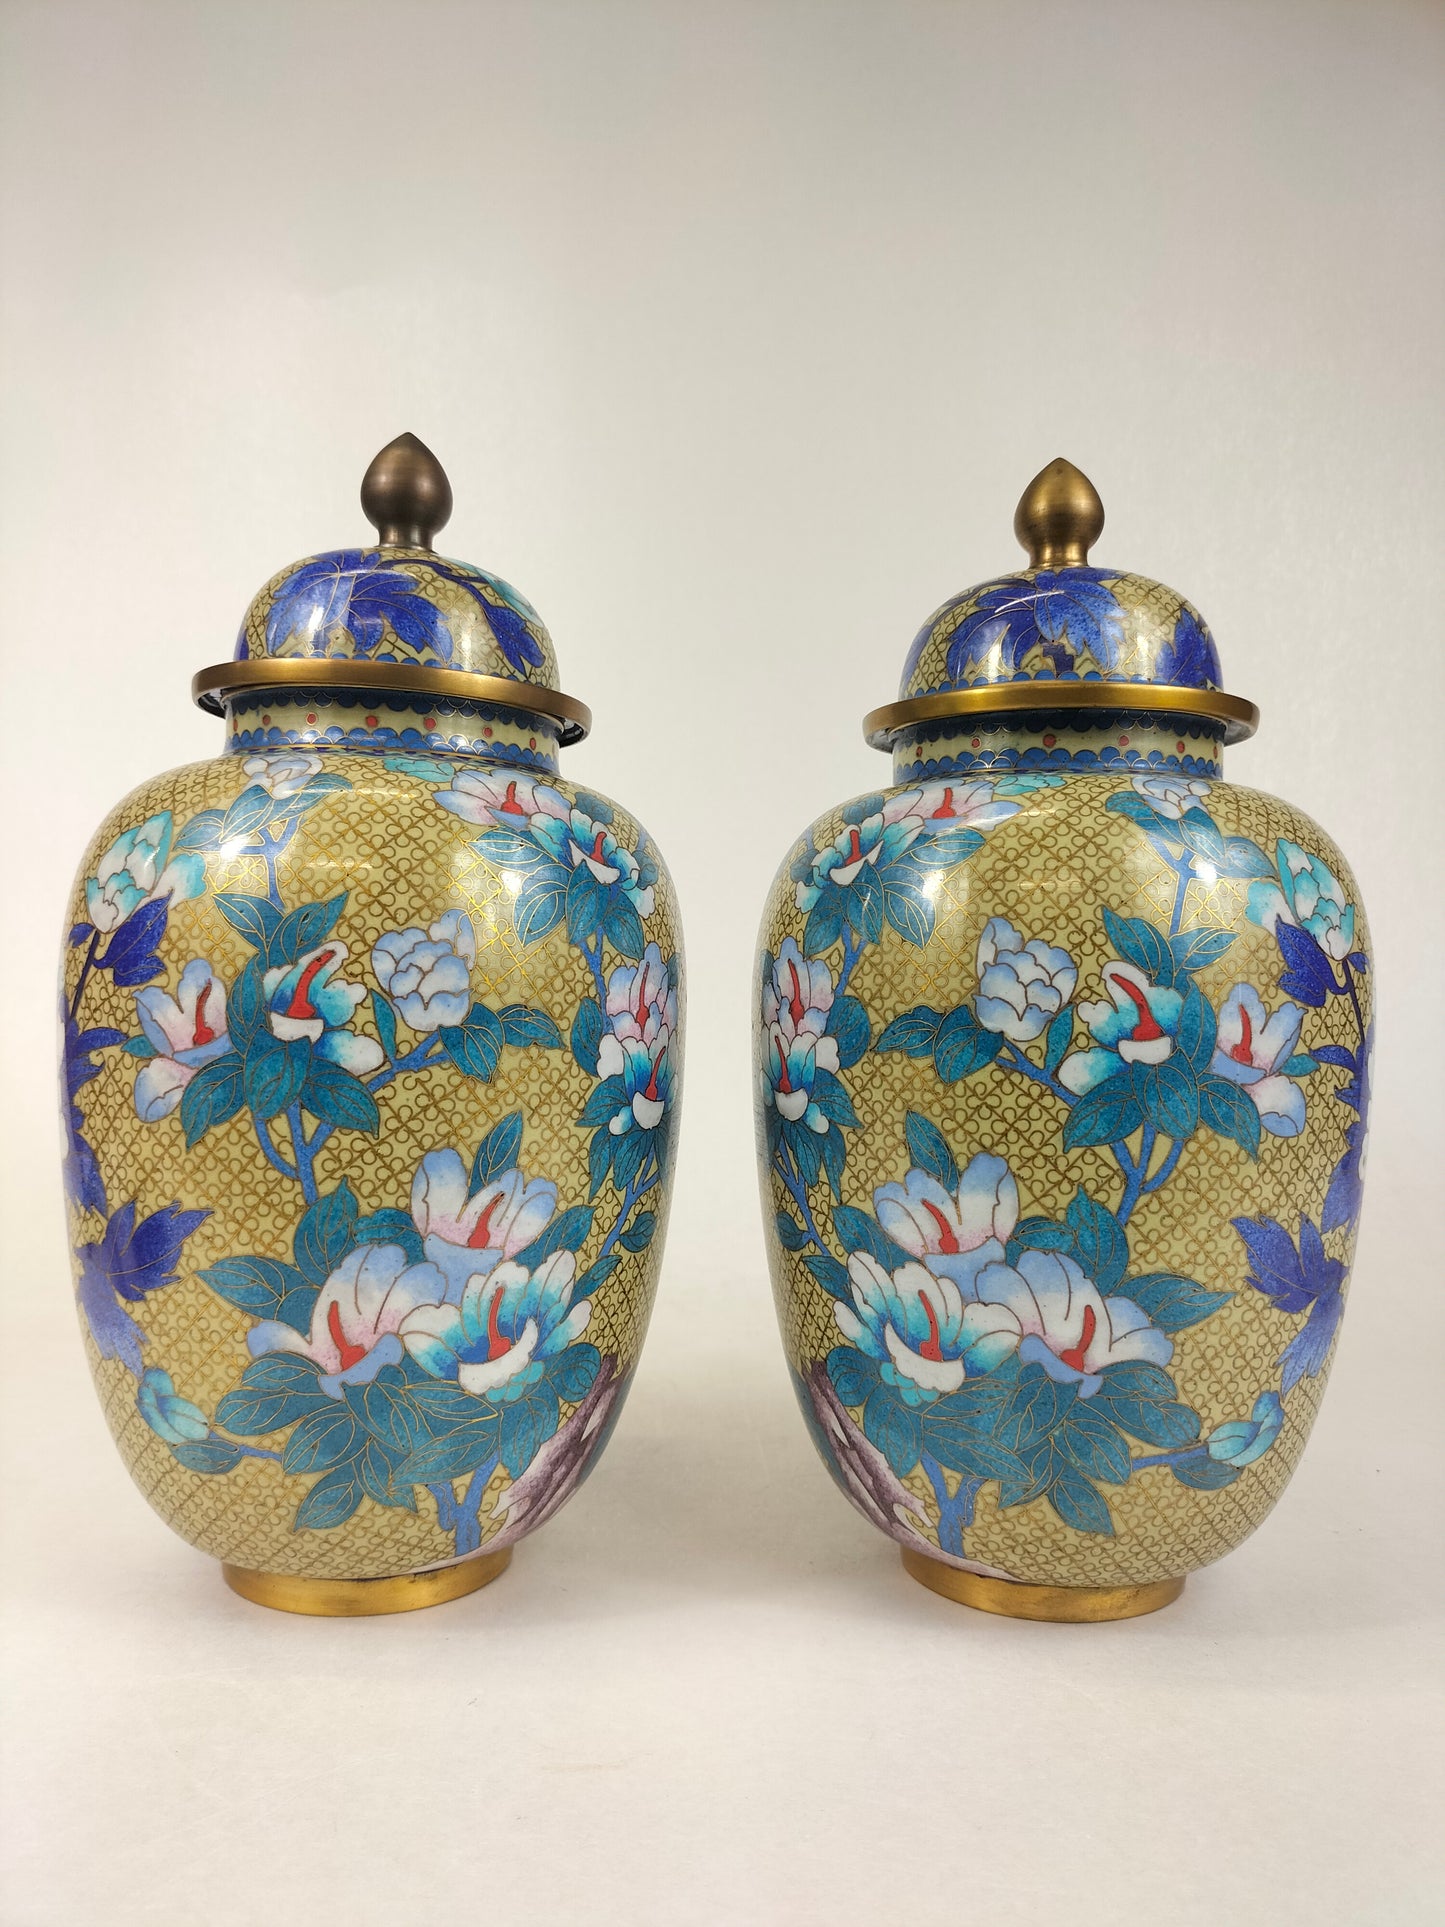 Pair of Chinese cloisonne lidded vases decorated with flowers // 20th century